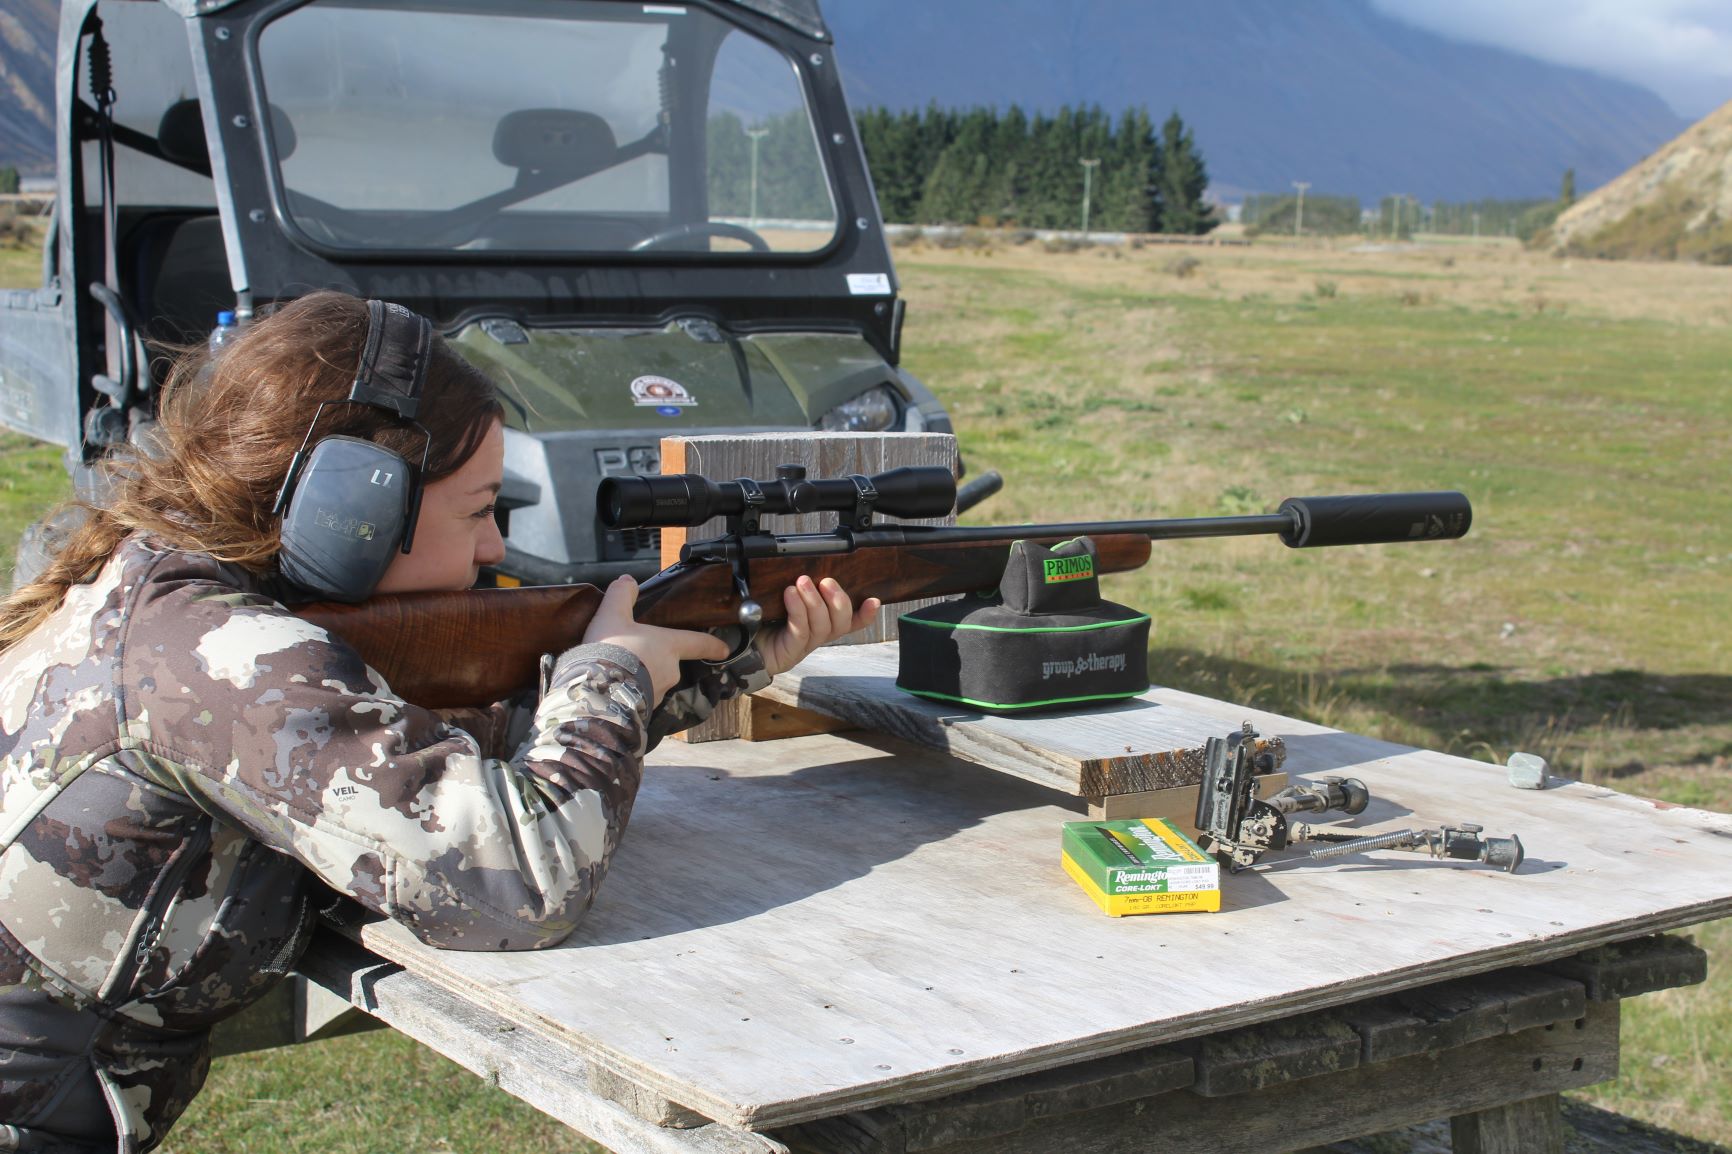 The 7mm-08 is fairly popular worldwide. In New Zealand Caroline used outfitter Chris Bilkey’s Sako 7mm-08 with suppressor. With mild recoil and amazing performance, one of the hallmarks of the 7mm-08 is it’s easy to shoot well!